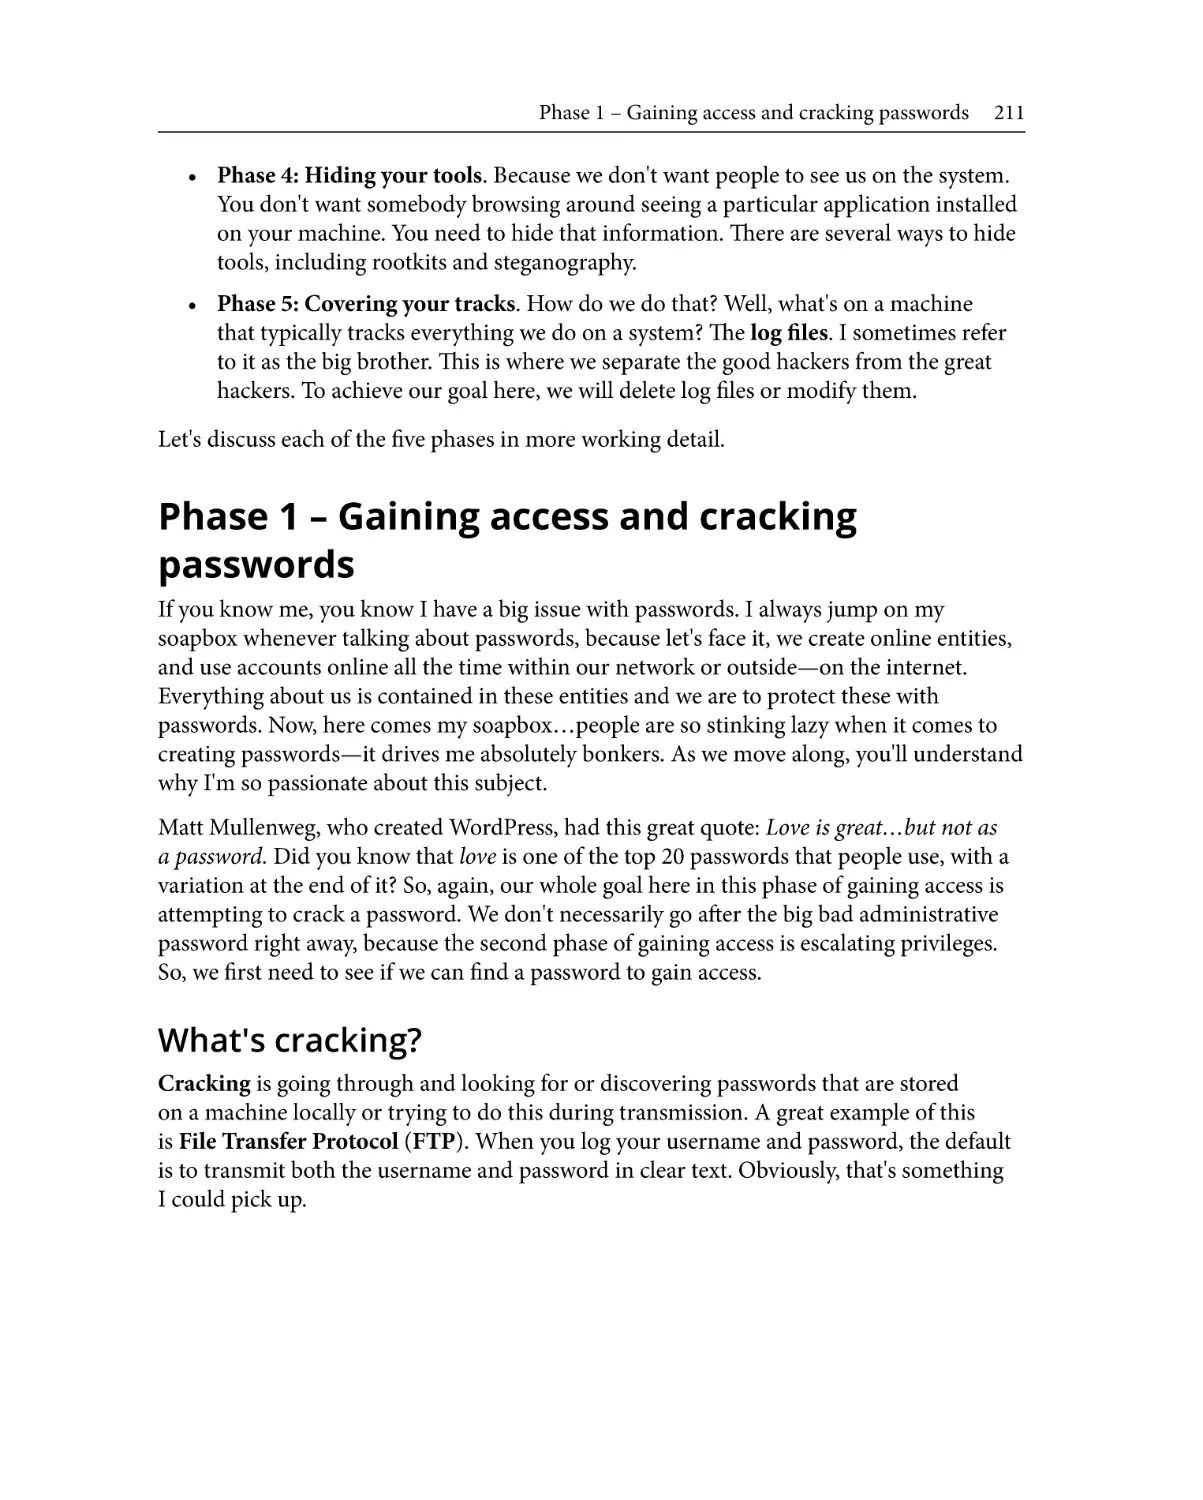 Phase 1 – Gaining access and cracking passwords
What's cracking?